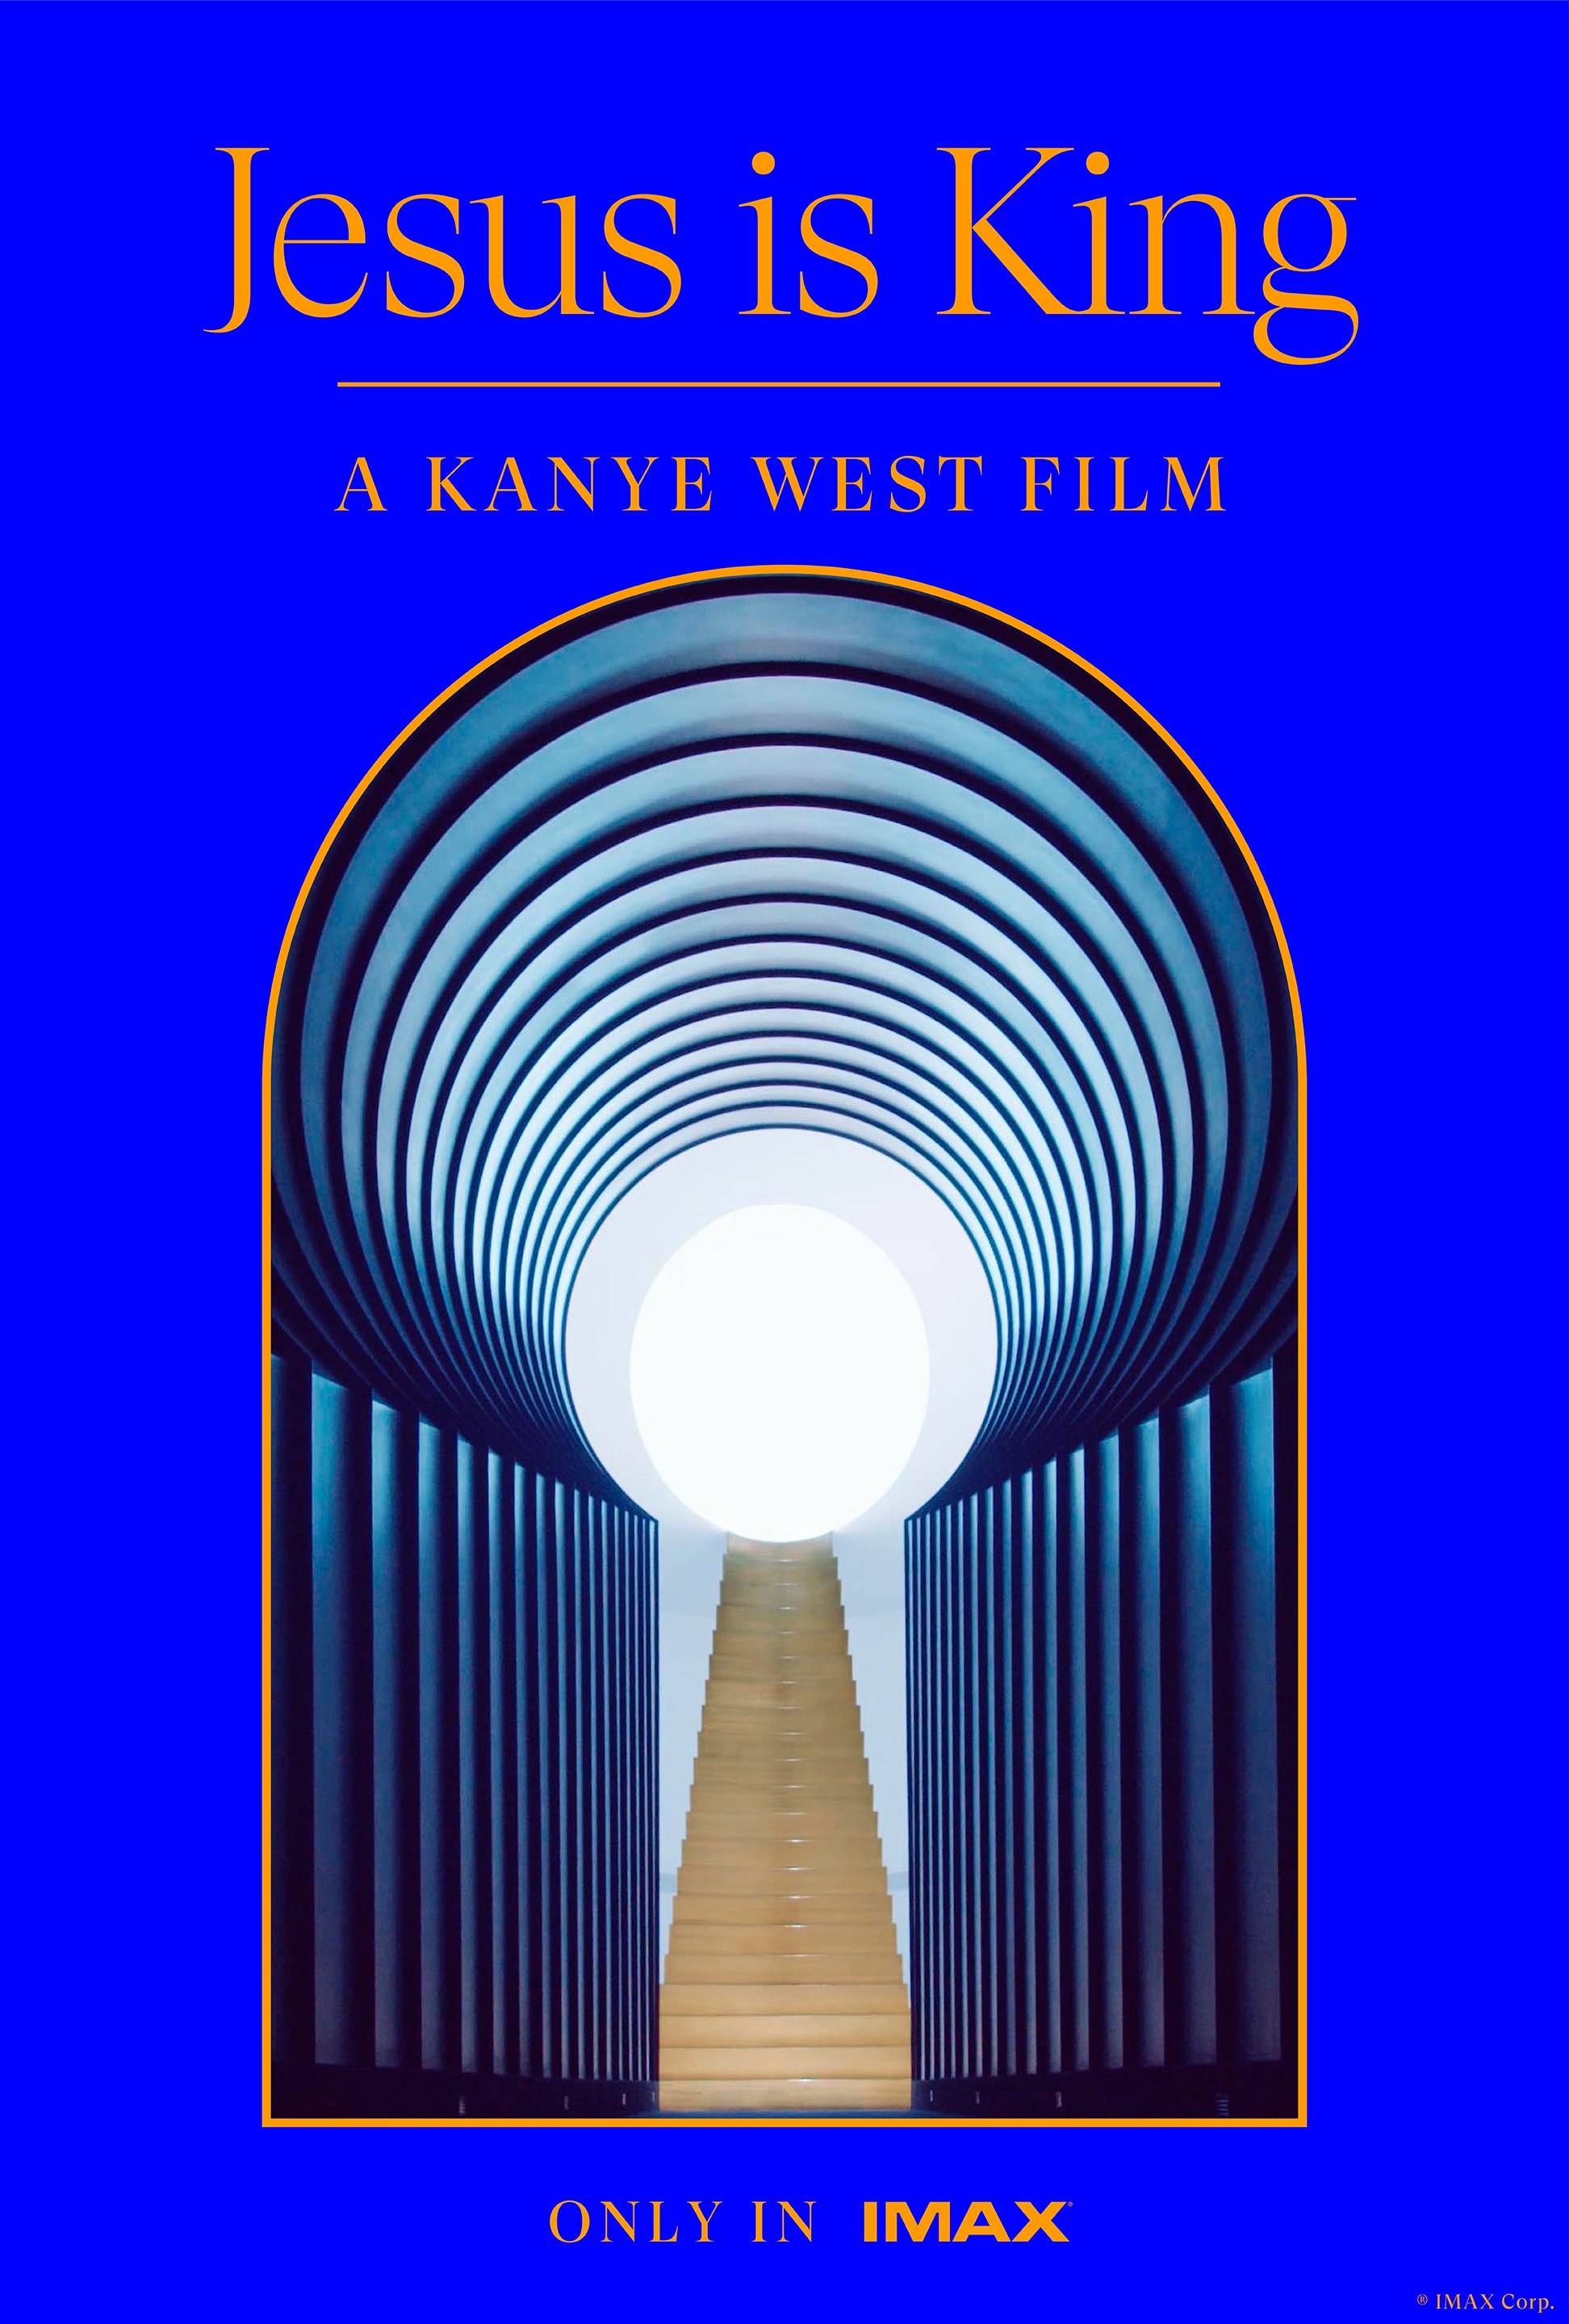 Kanye West Announces <i></noscript>Jesus Is King</i> Documentary” title=”IMAX-Jesus_is_King_27x40_RGB-1569769733″ data-original-id=”344133″ data-adjusted-id=”344133″ class=”sm_size_full_width sm_alignment_center ” data-image-use=”multiple_use” />
</p> </div>
</div>
</div>
</div>
</div>
</div>
</div>
</section>
<section data-particle_enable=